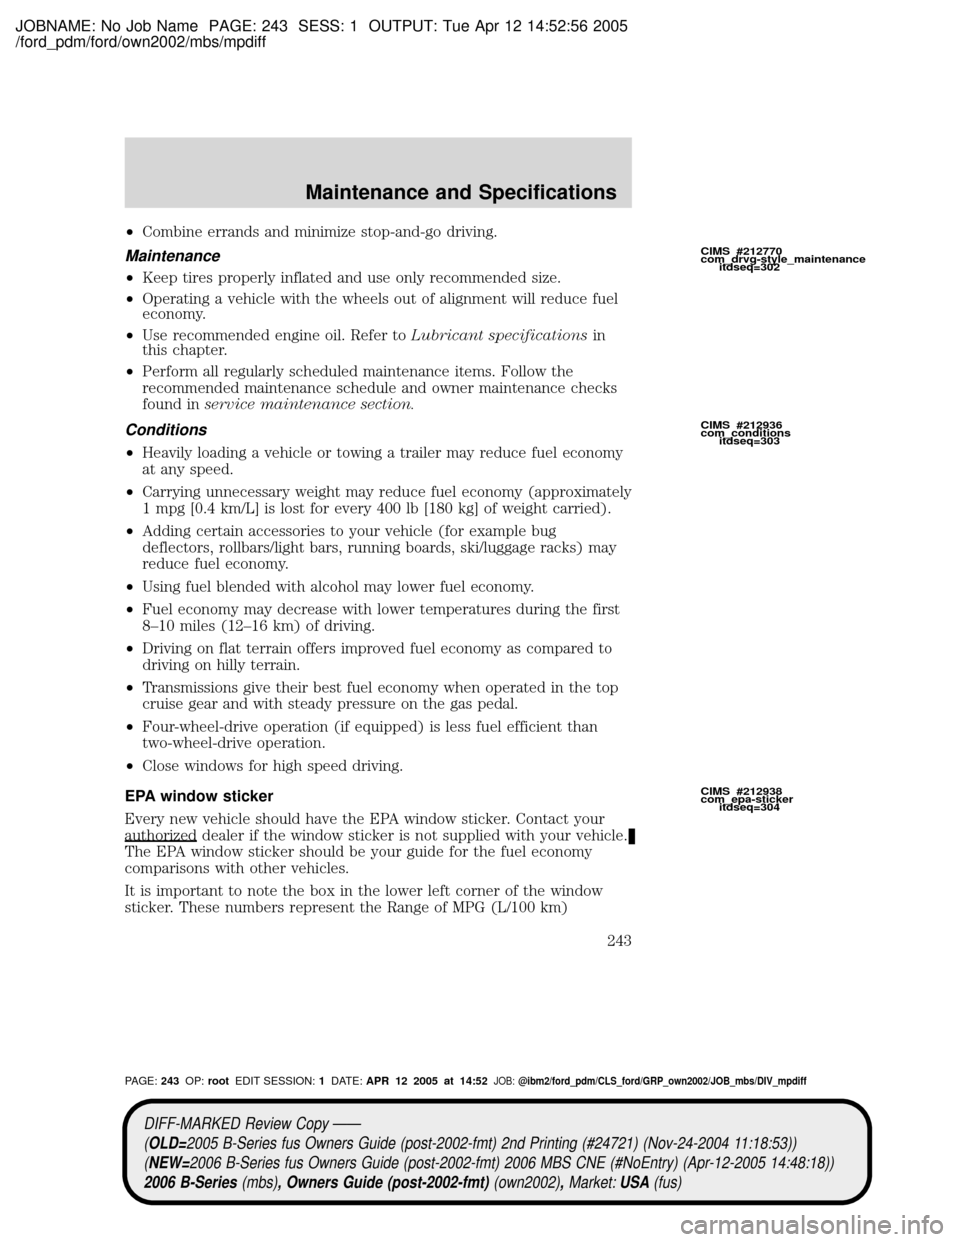 MAZDA MODEL B2300 TRUCK 2006  Owners Manual (in English) JOBNAME: No Job Name PAGE: 243 SESS: 1 OUTPUT: Tue Apr 12 14:52:56 2005
/ford_pdm/ford/own2002/mbs/mpdiff
²Combine errands and minimize stop-and-go driving.
Maintenance
²Keep tires properly inflated